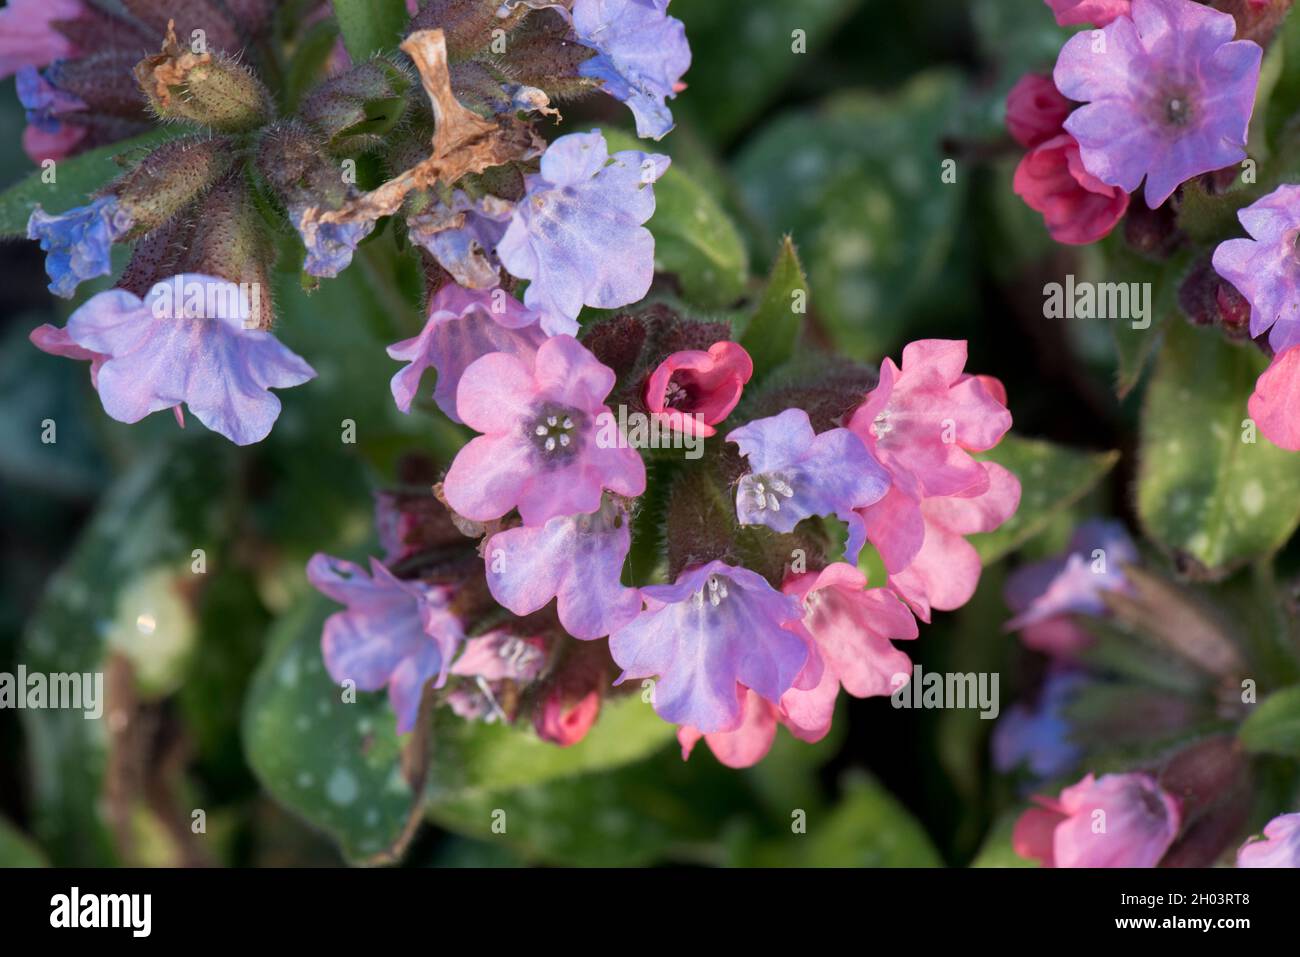 Lungwort (Pulmonaria officinalis) blue, lilac and pink flowers among spotted leaves on this garden plant, Berkshire, March Stock Photo